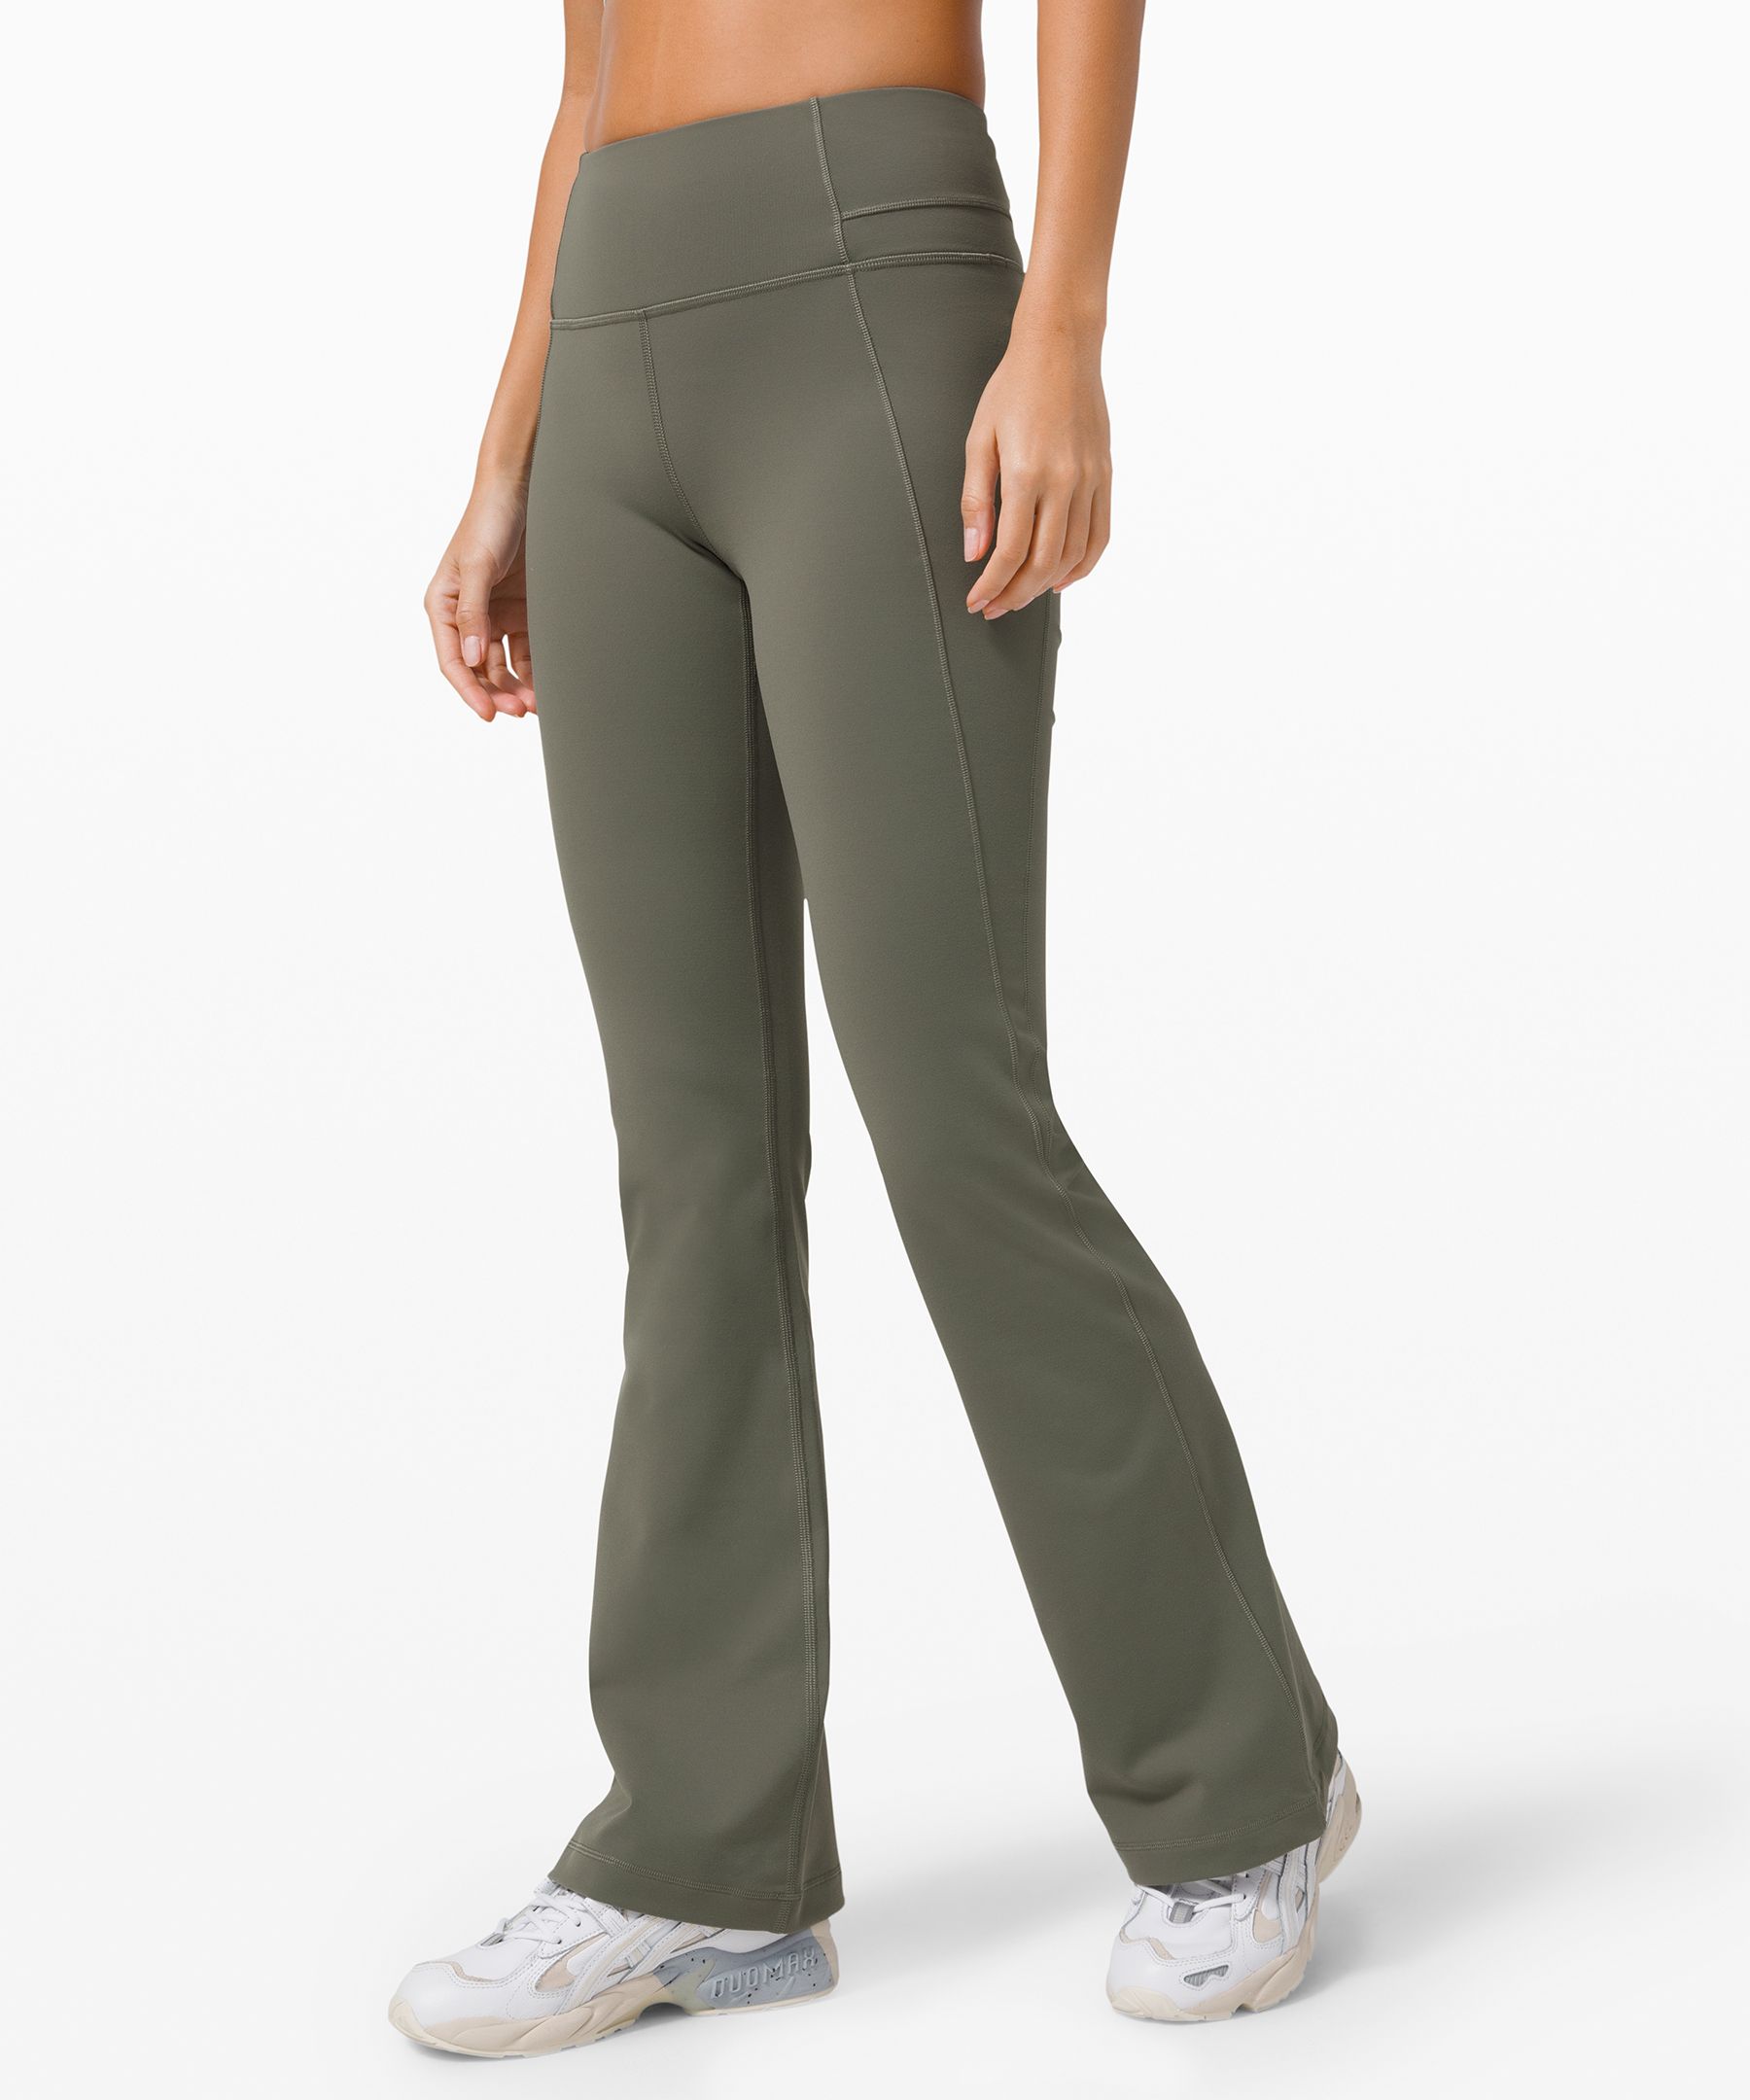 Lululemon Groove Pant Size 8 Review  International Society of Precision  Agriculture